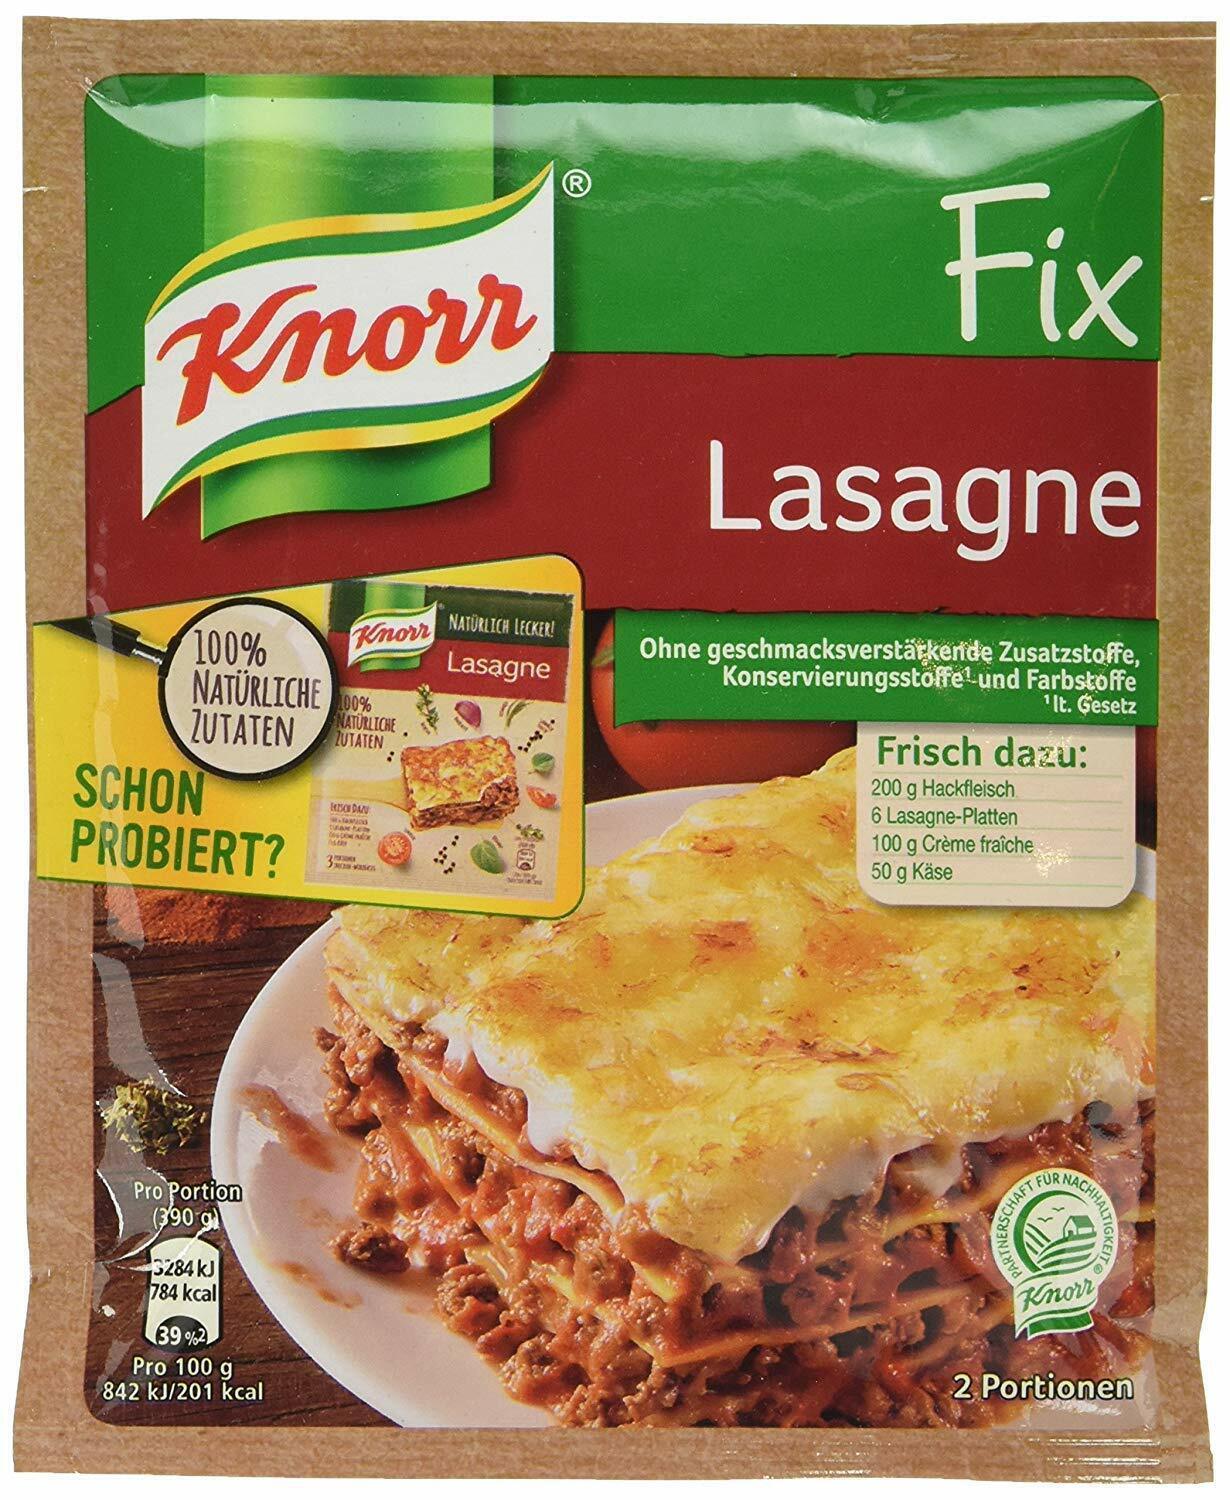 Primary image for KNORR Fix Spice mix for LASAGNA Lasagne 1ct/2 servings -FREE SHIPPING